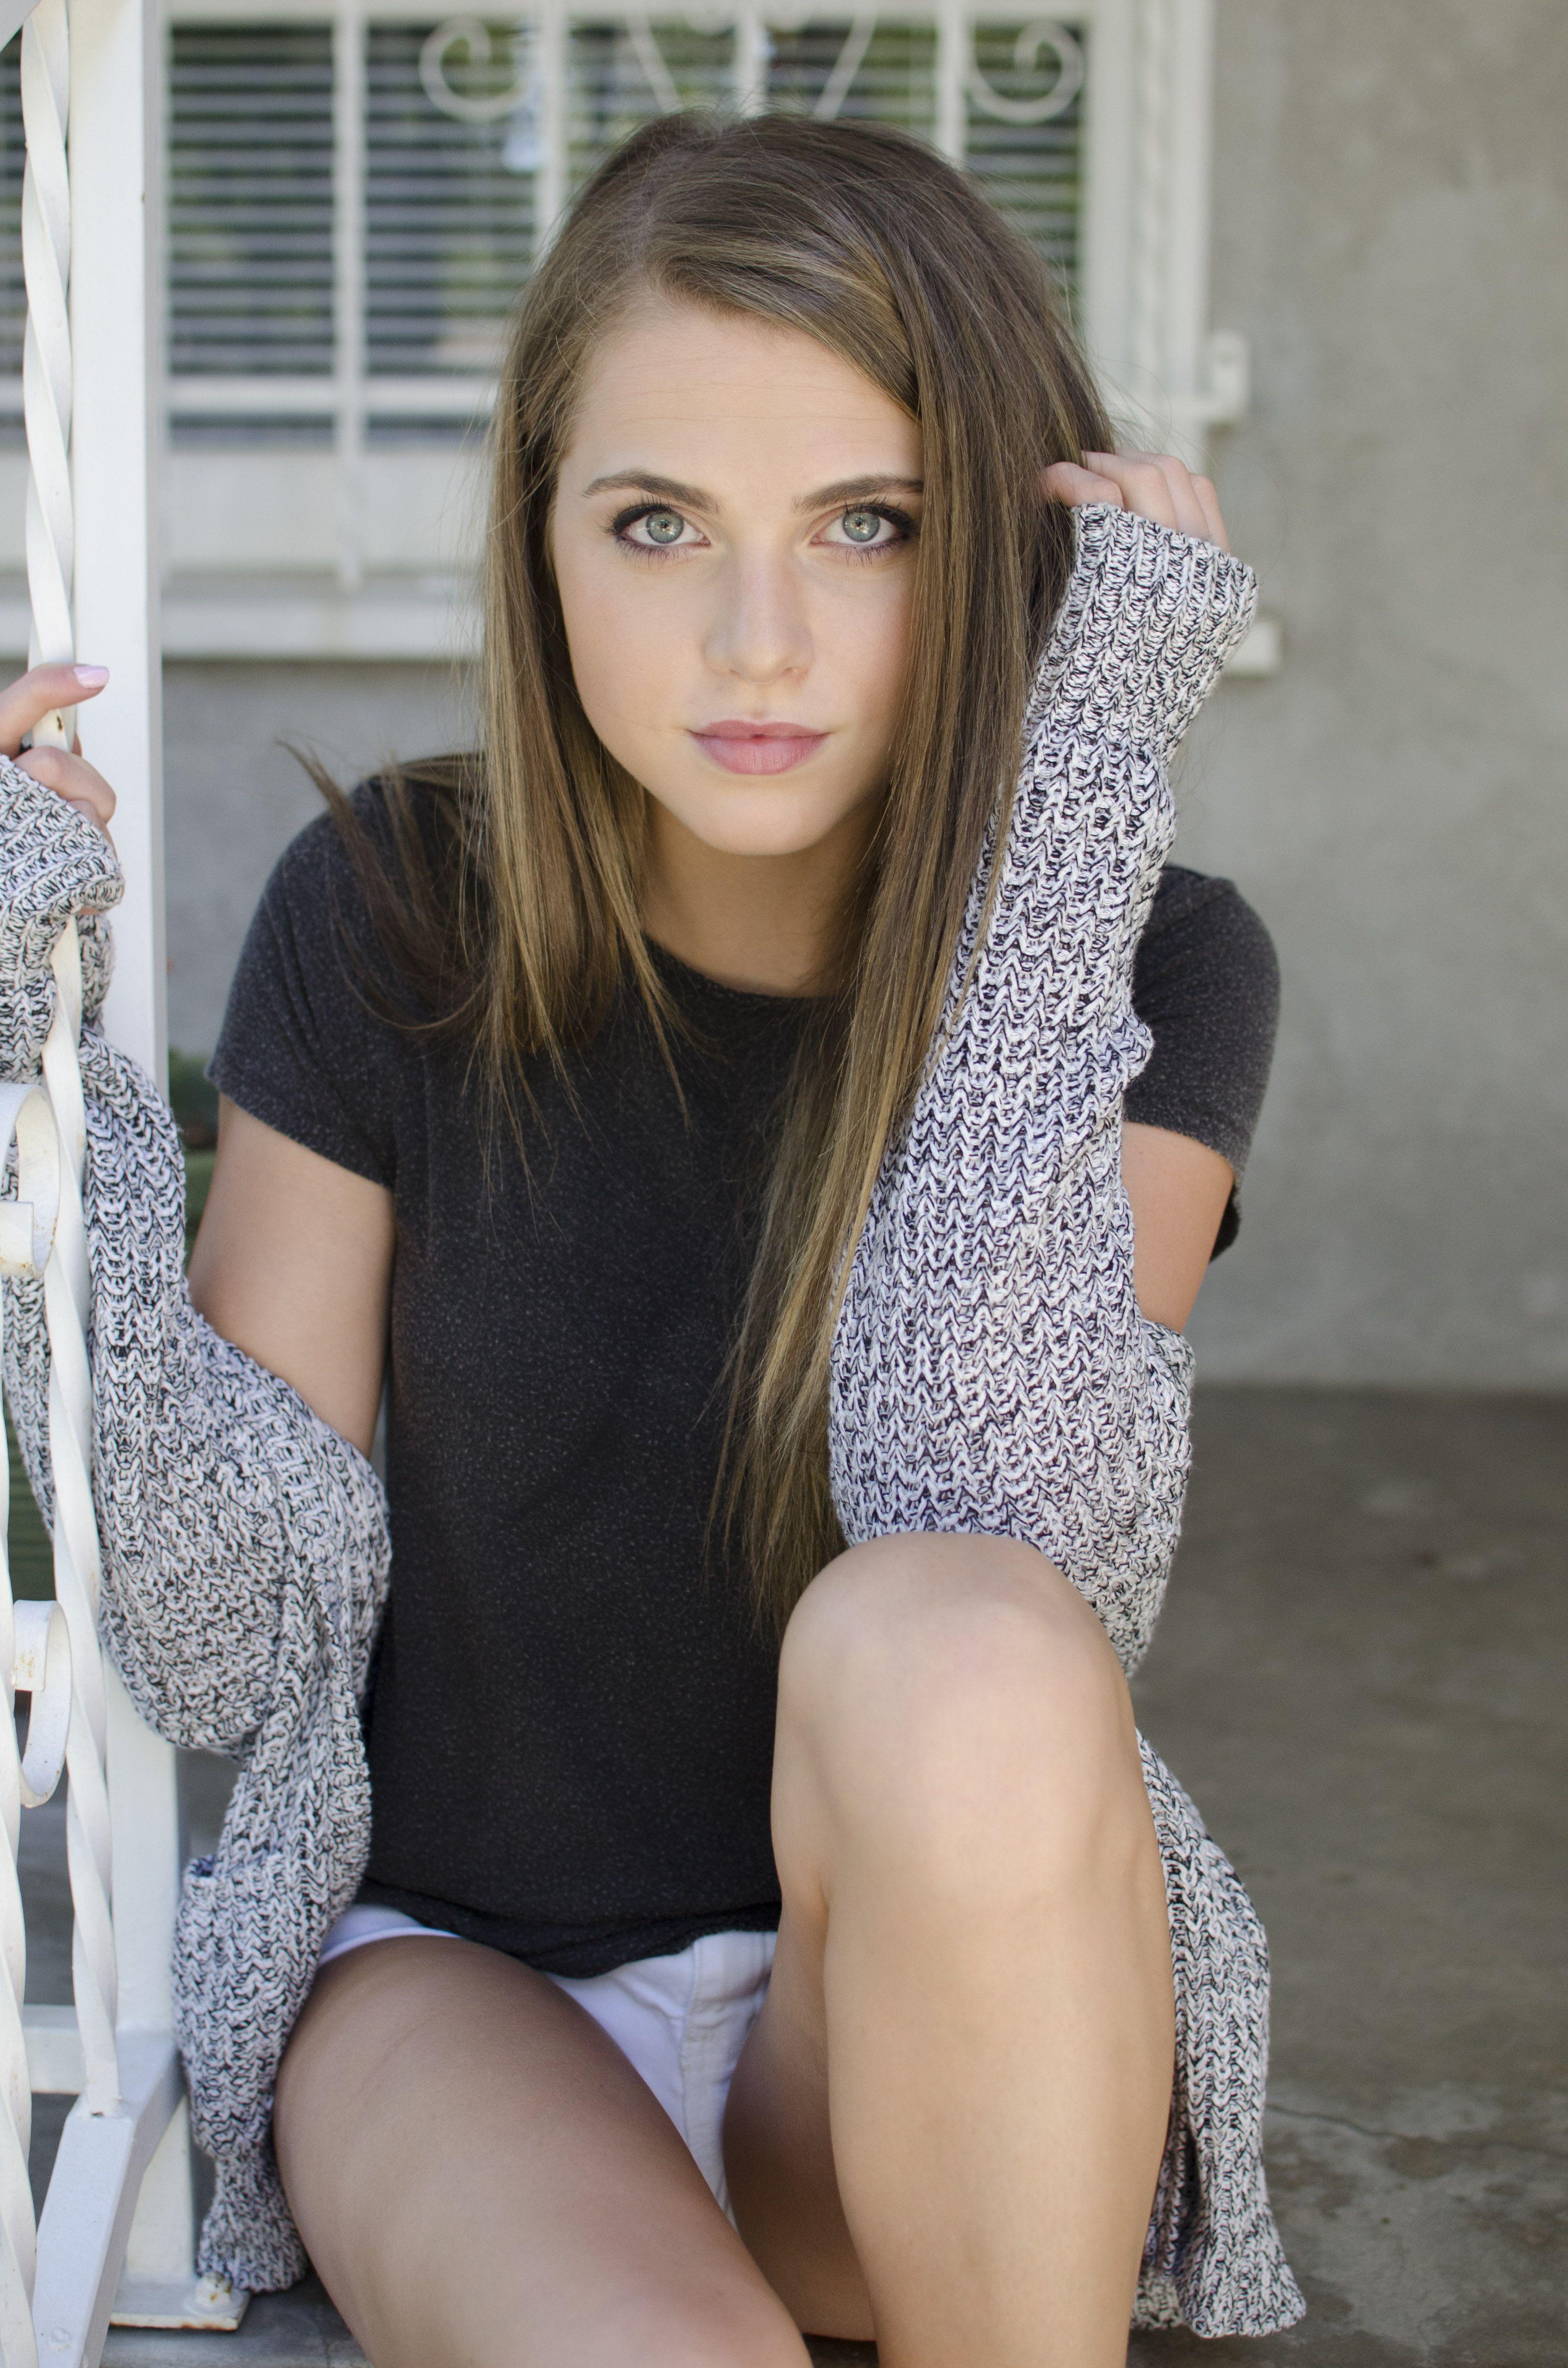 Picture of Anne Winters (actress) Of Celebrities